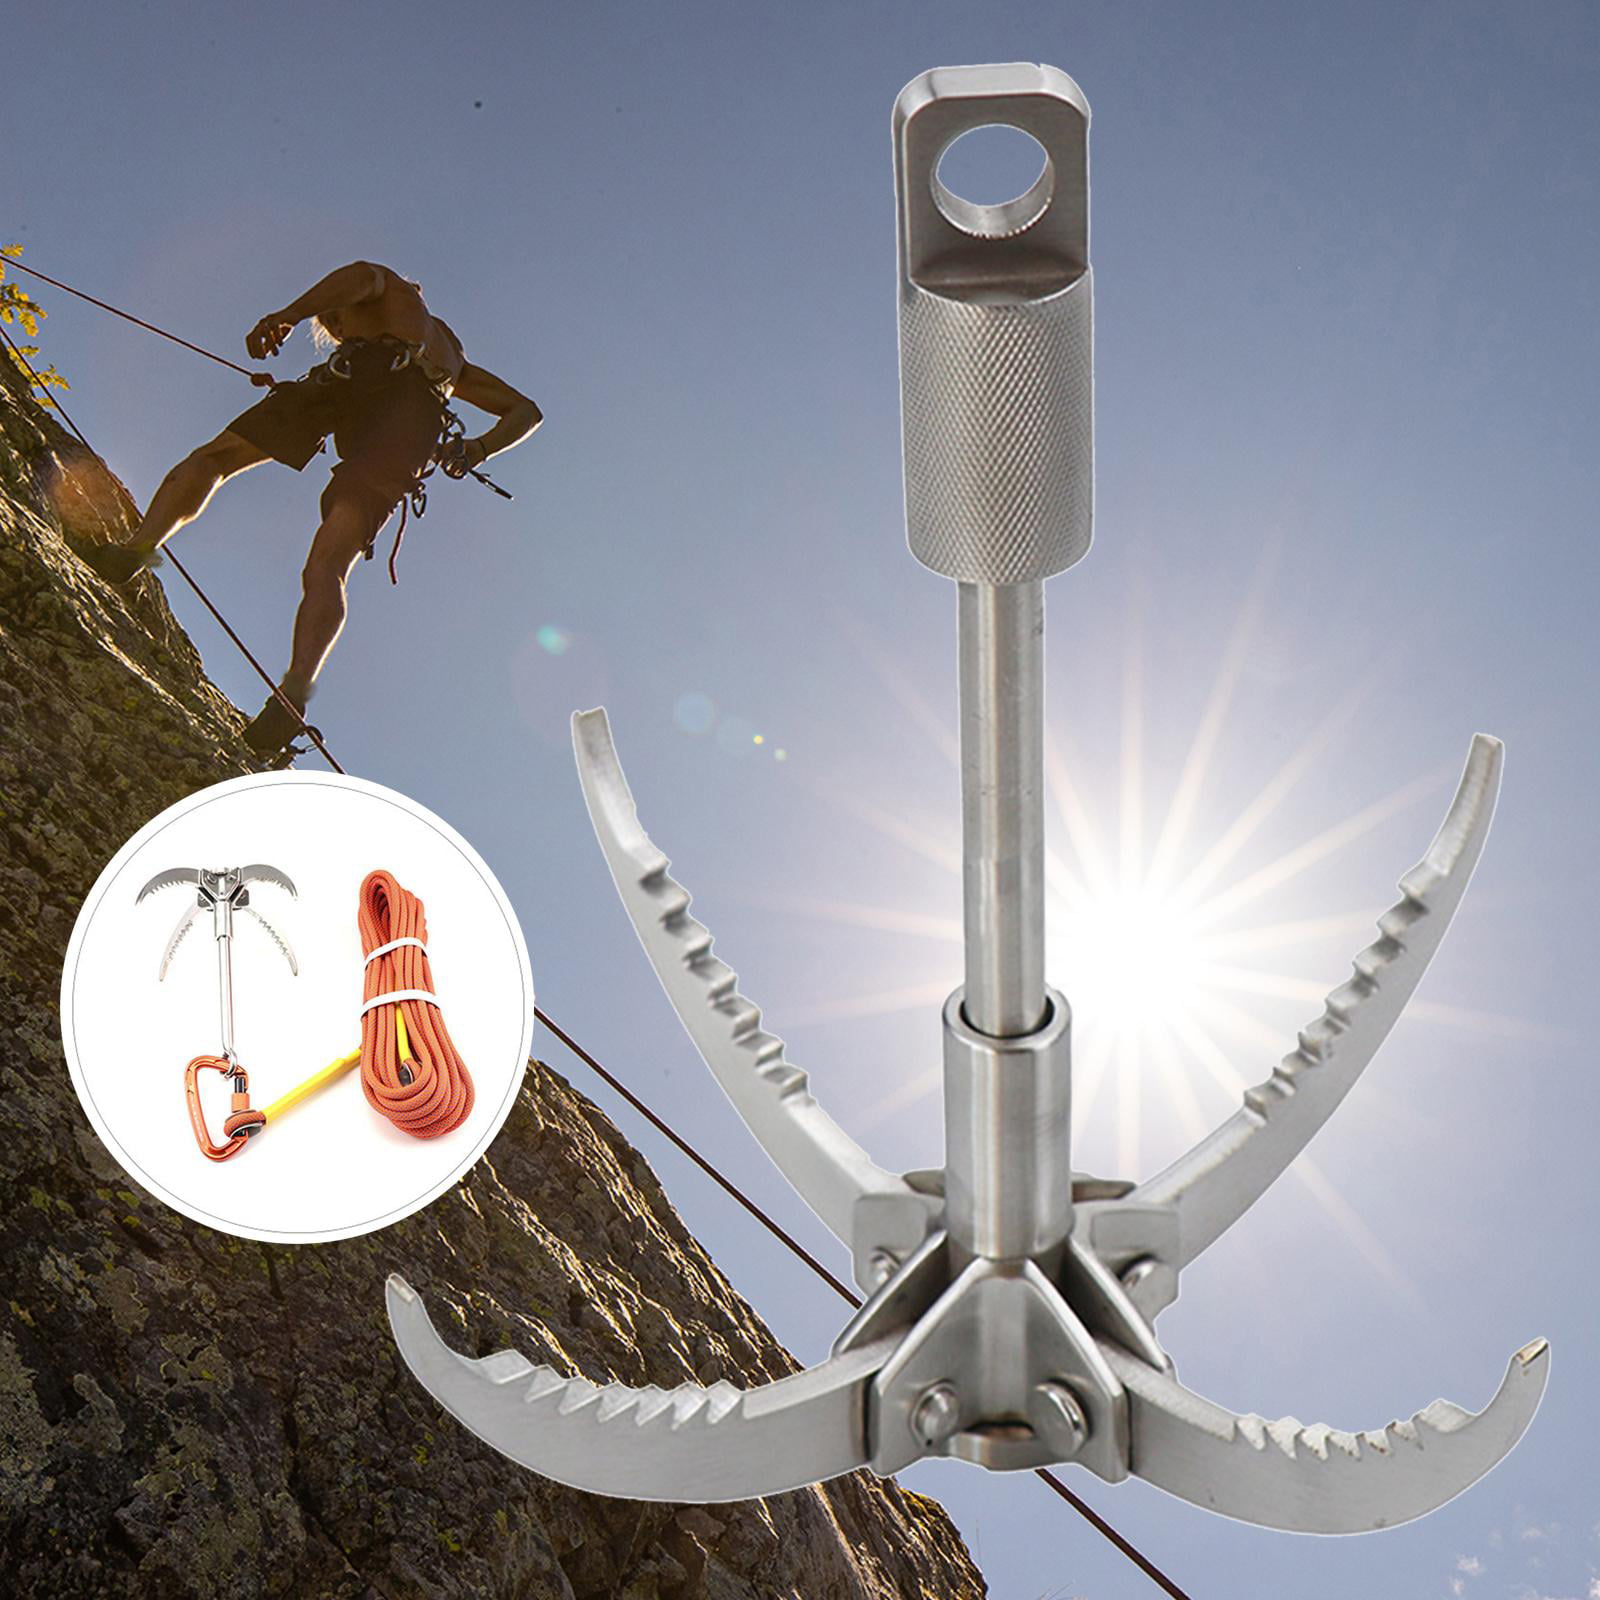 Flying Tiger Claw Outdoor Hooks Kid Tools Pegging Grappling Hook for Kids  Large s Hooks Outdoor Survival Hook Claw for Climbing Accessories Child